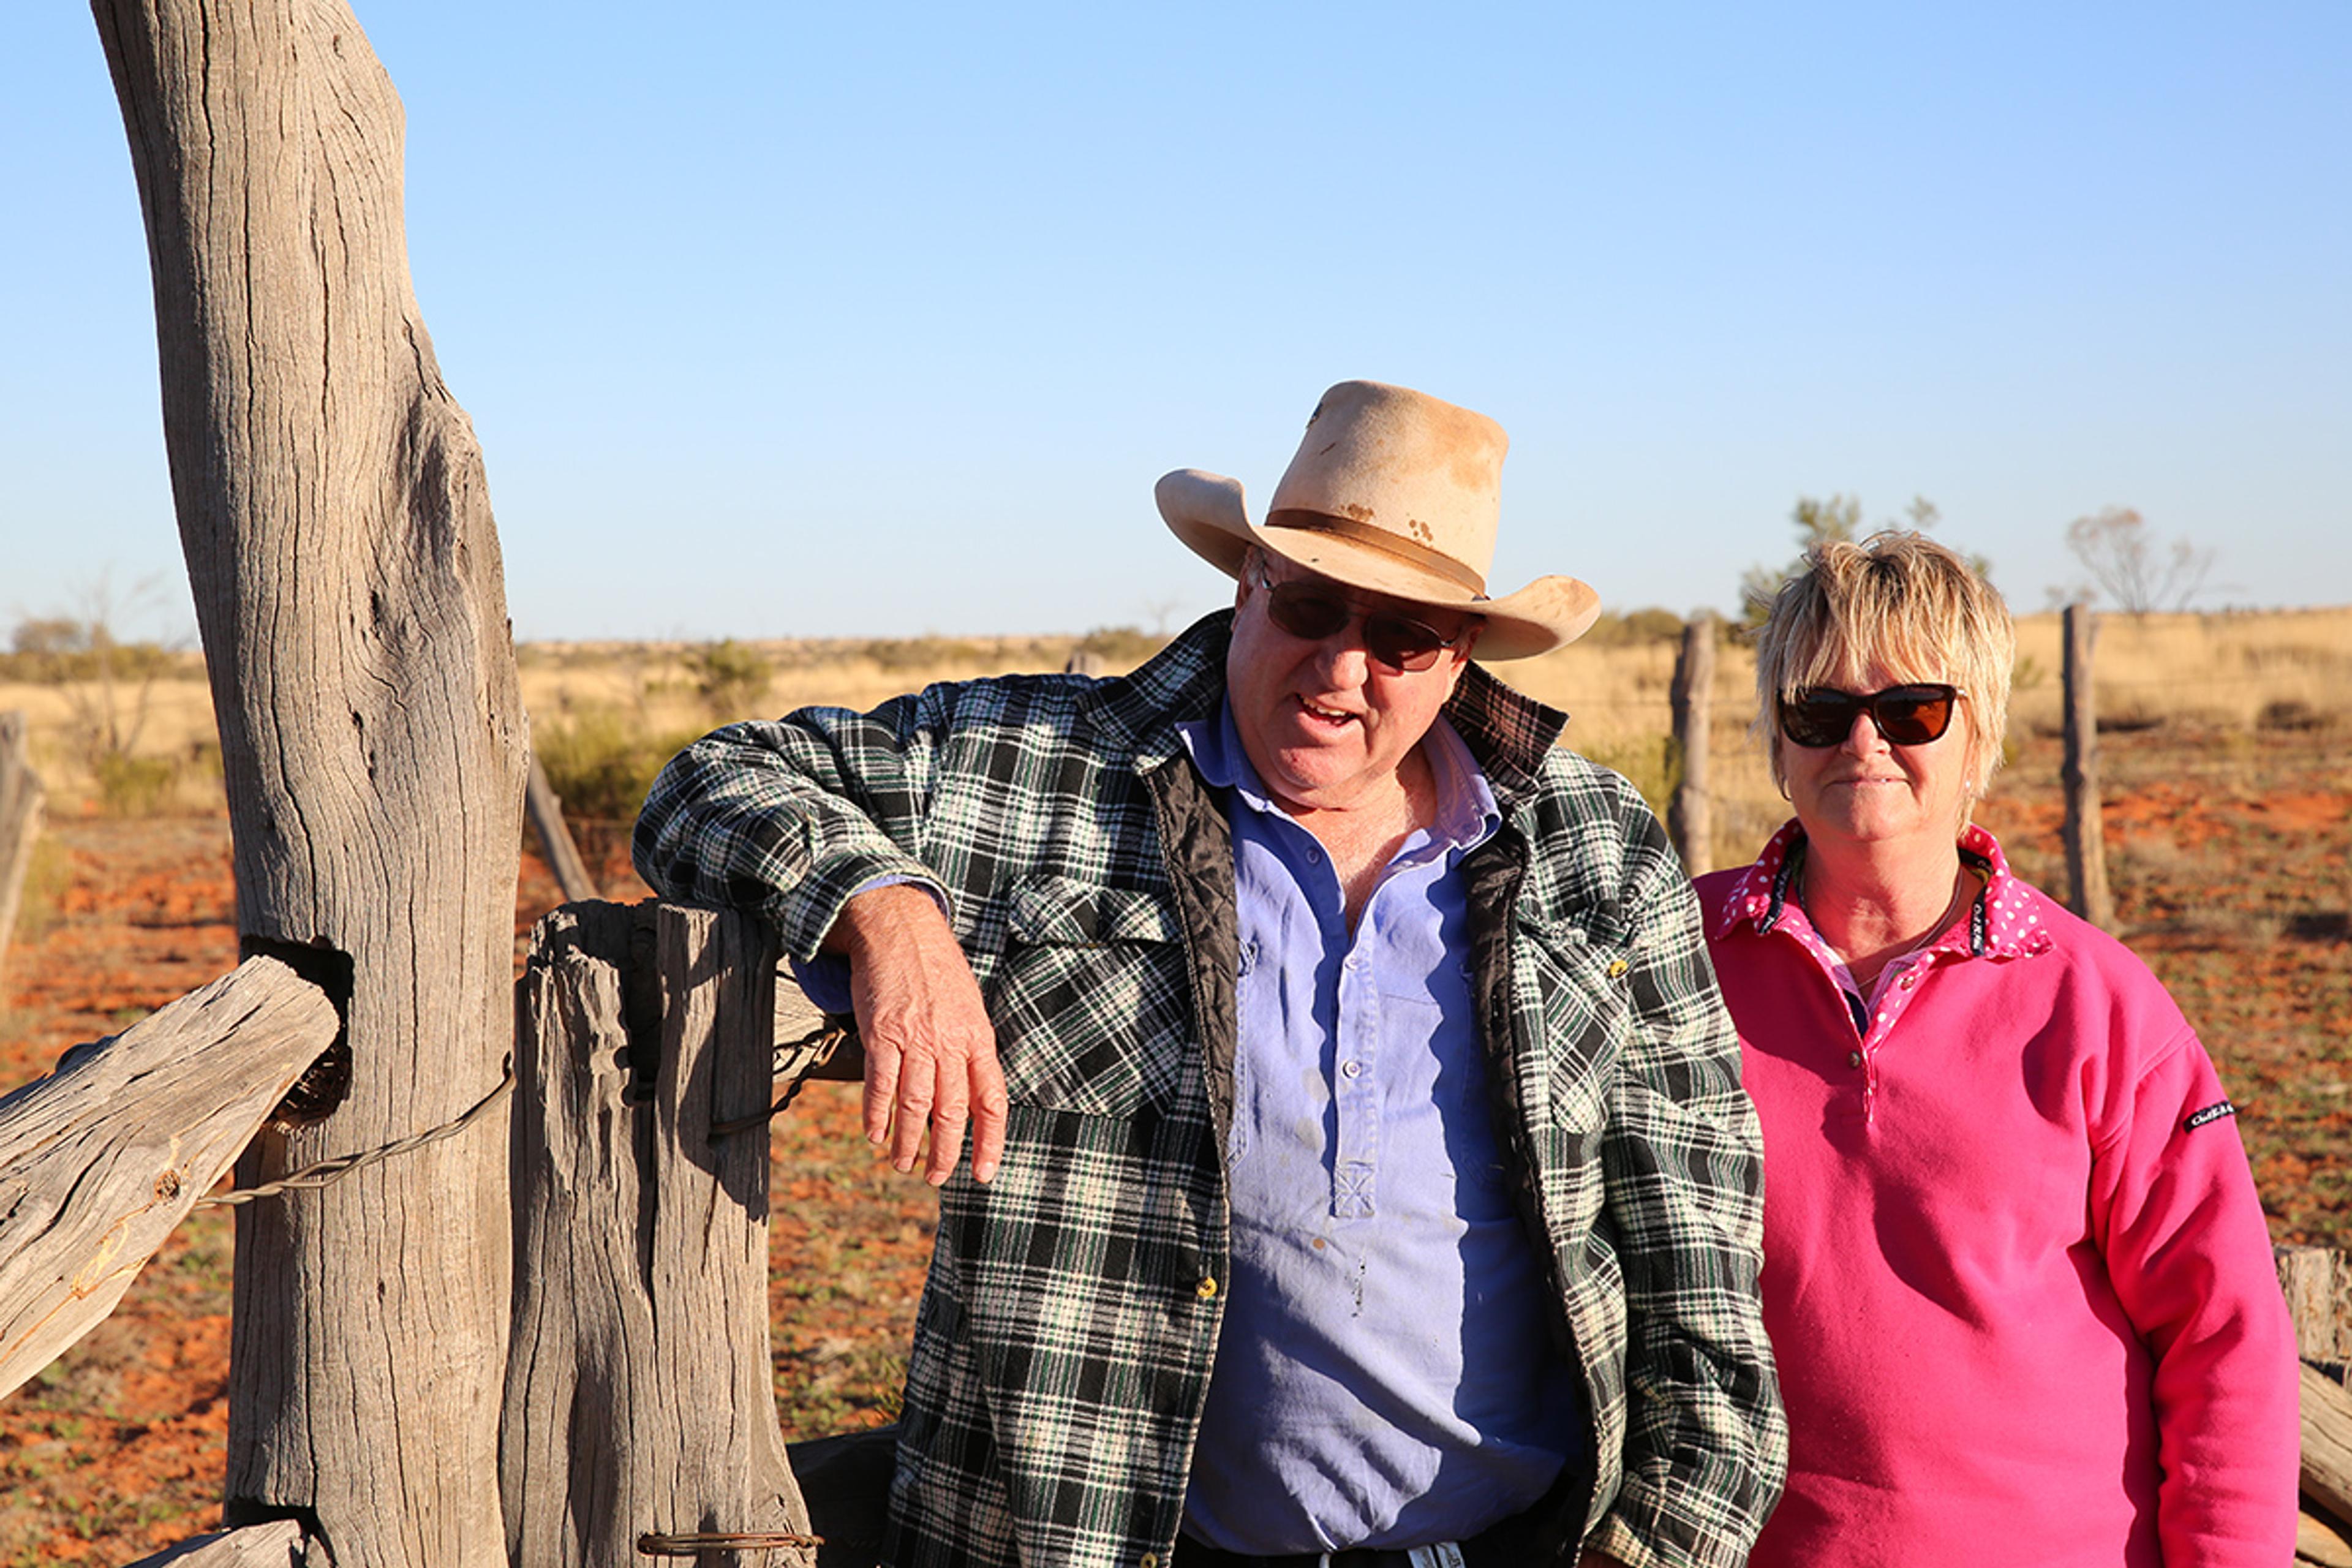 Two Australian grass-fed beef farmers stand in the sun and lean against a wooden post.